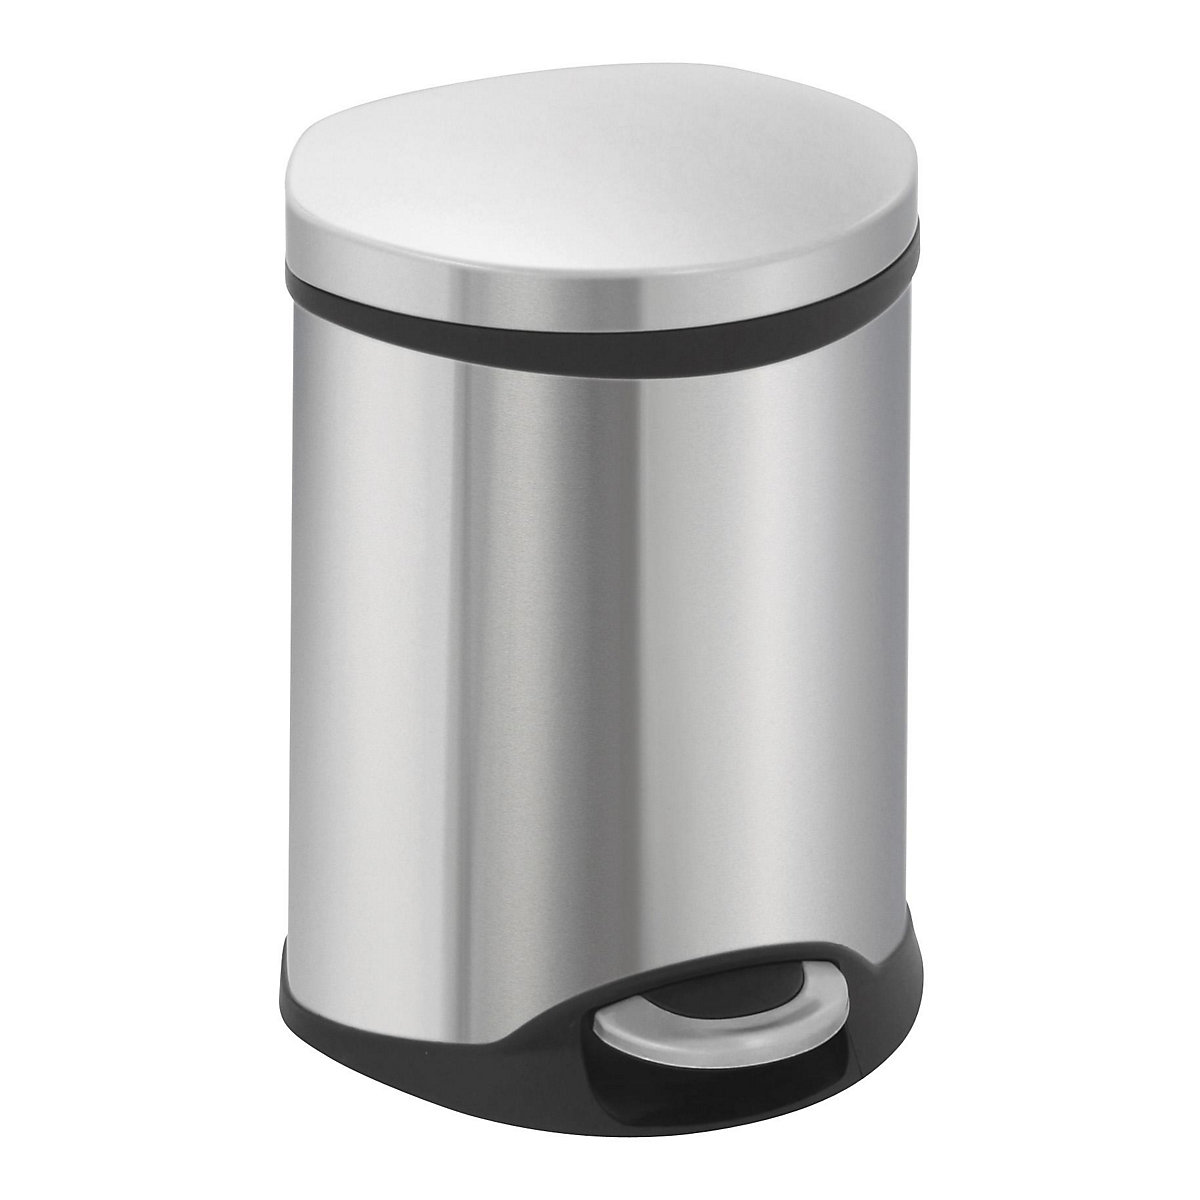 Waste collector with pedal, shell shape – EKO, capacity 6 l, HxWxD 314 x 238 x 235 mm, stainless steel body-4